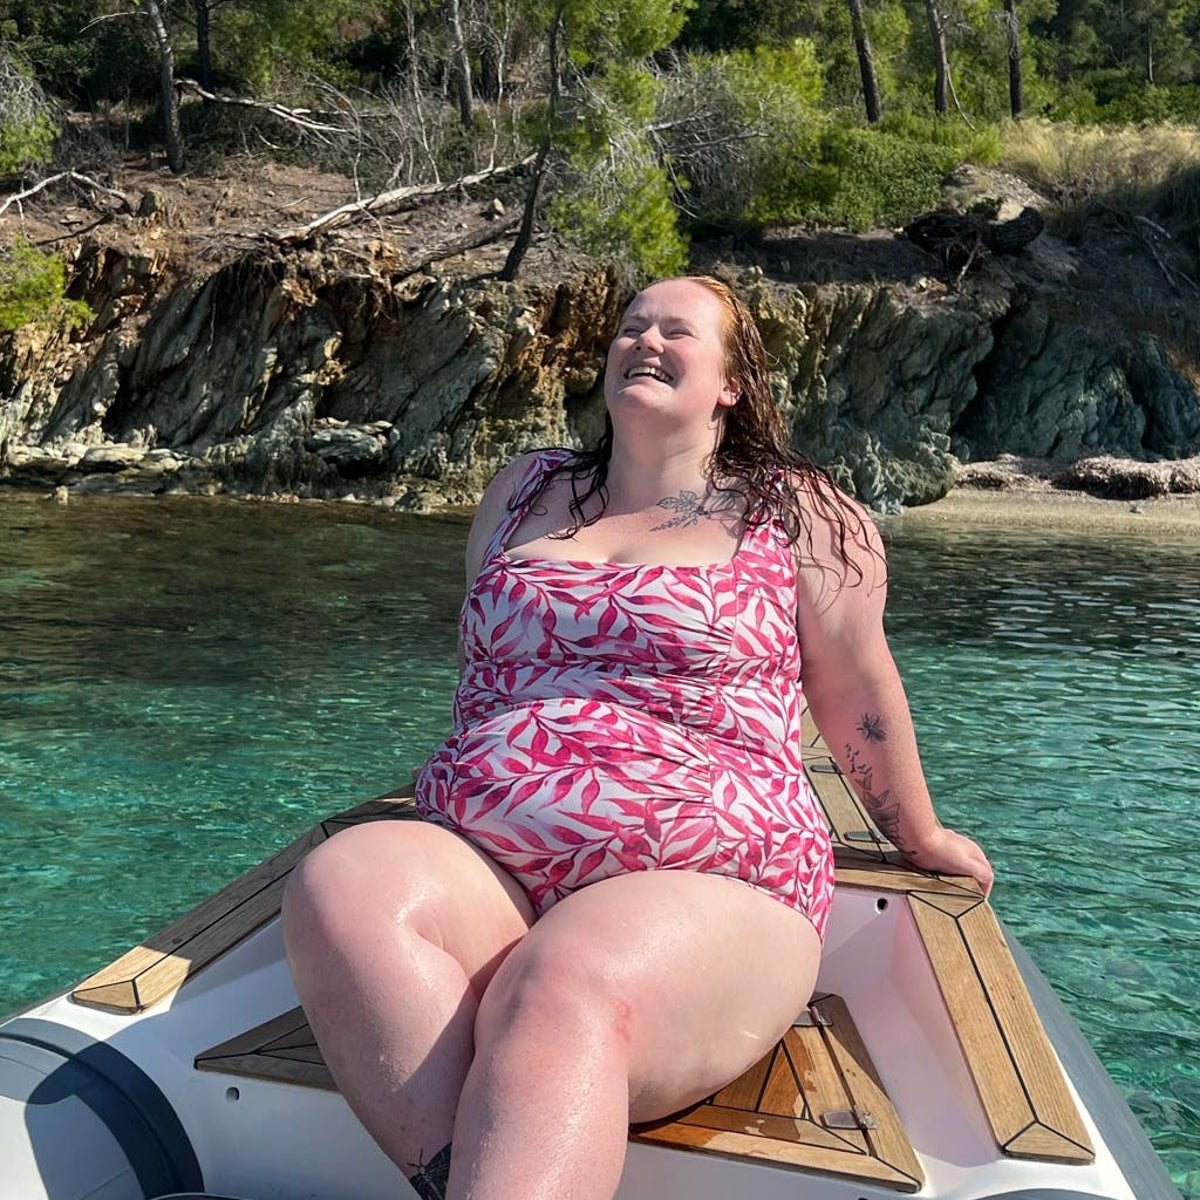 Influencer who once thought she was 'too fat to travel' now plans holidays  for plus-size women